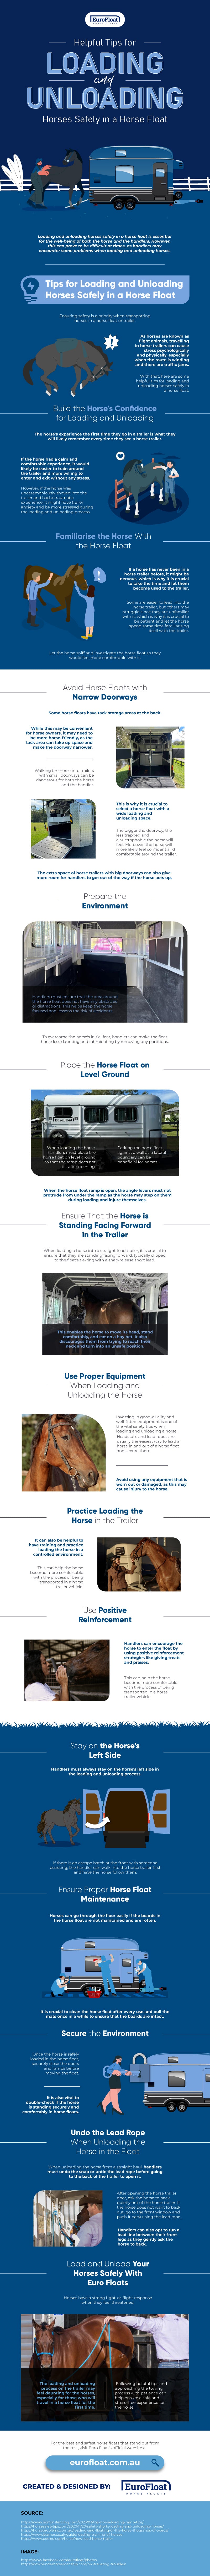 Helpful Tips for Loading and Unloading Horses Safely in a Horse Float infographic